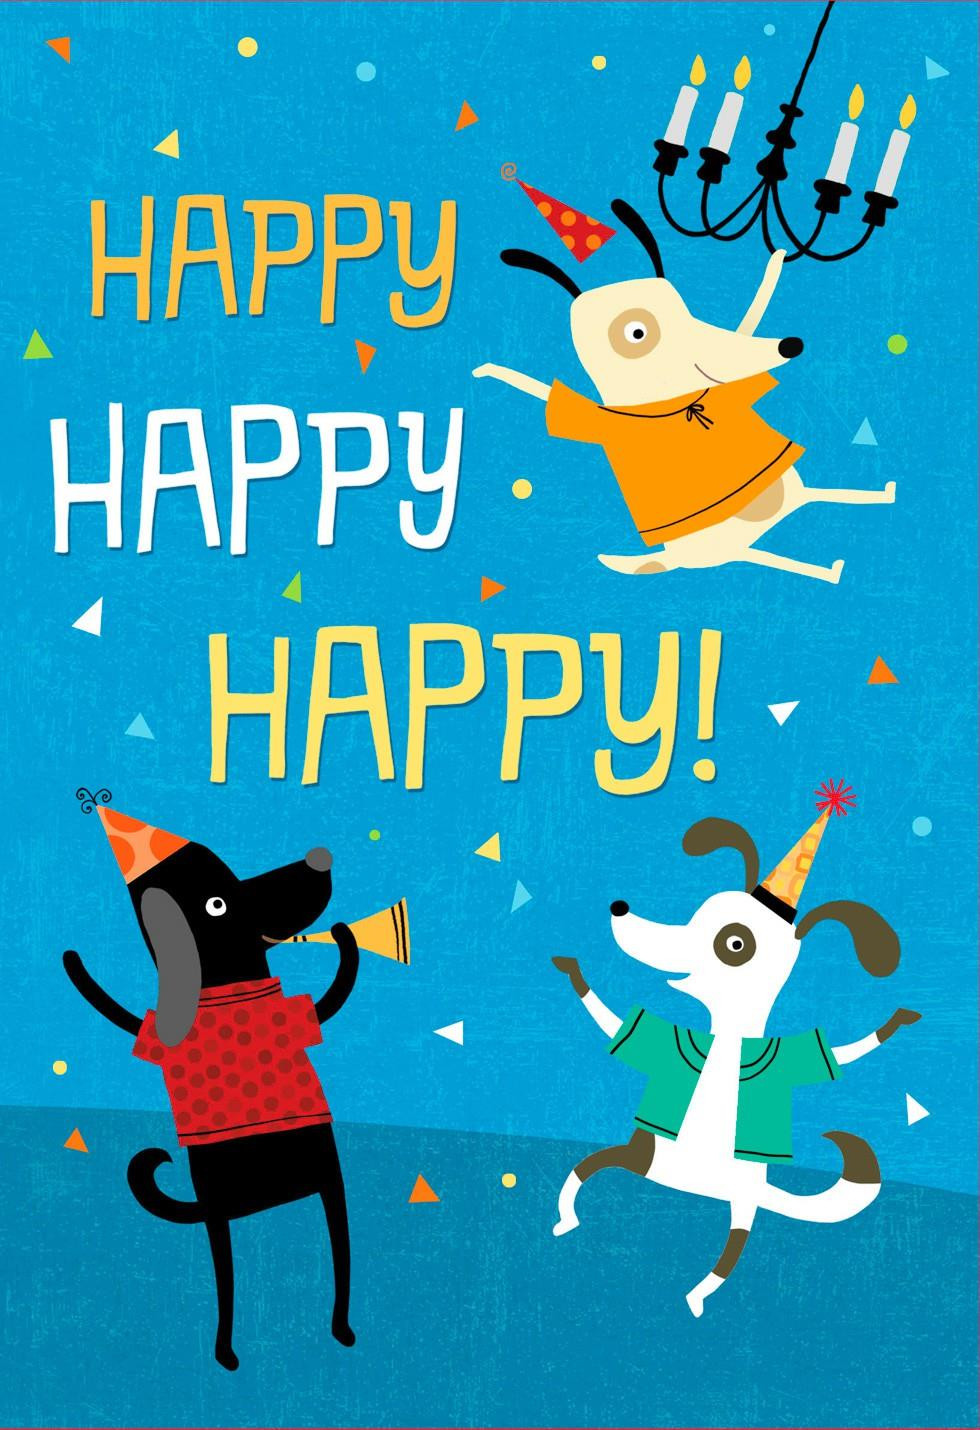 Free Musical Birthday Cards
 Who Let the Dogs Out Musical Birthday Card Greeting